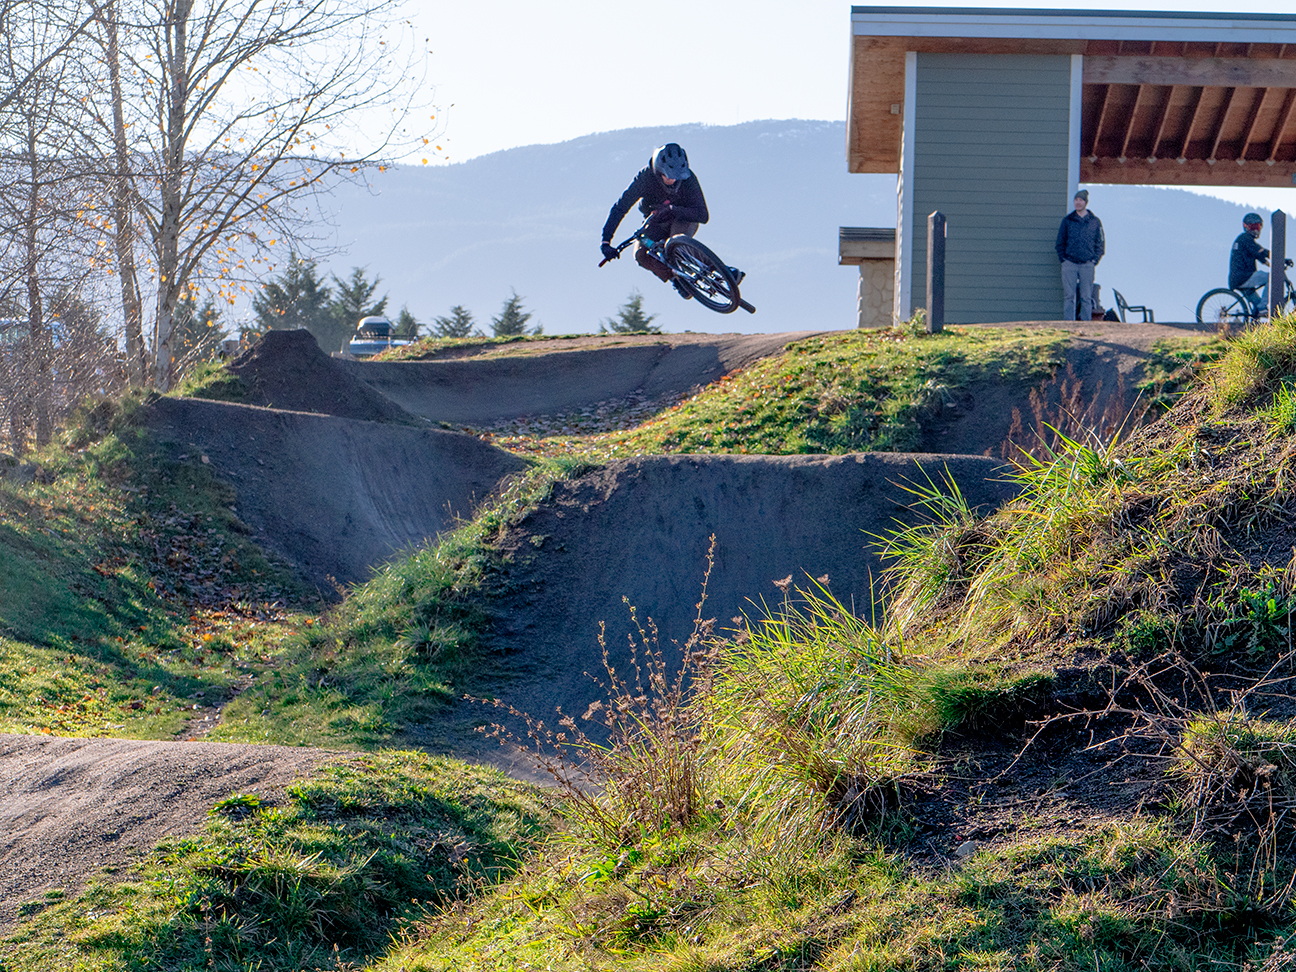 Cyclist jumping on a downhill run at the Steve Smith Bike Park